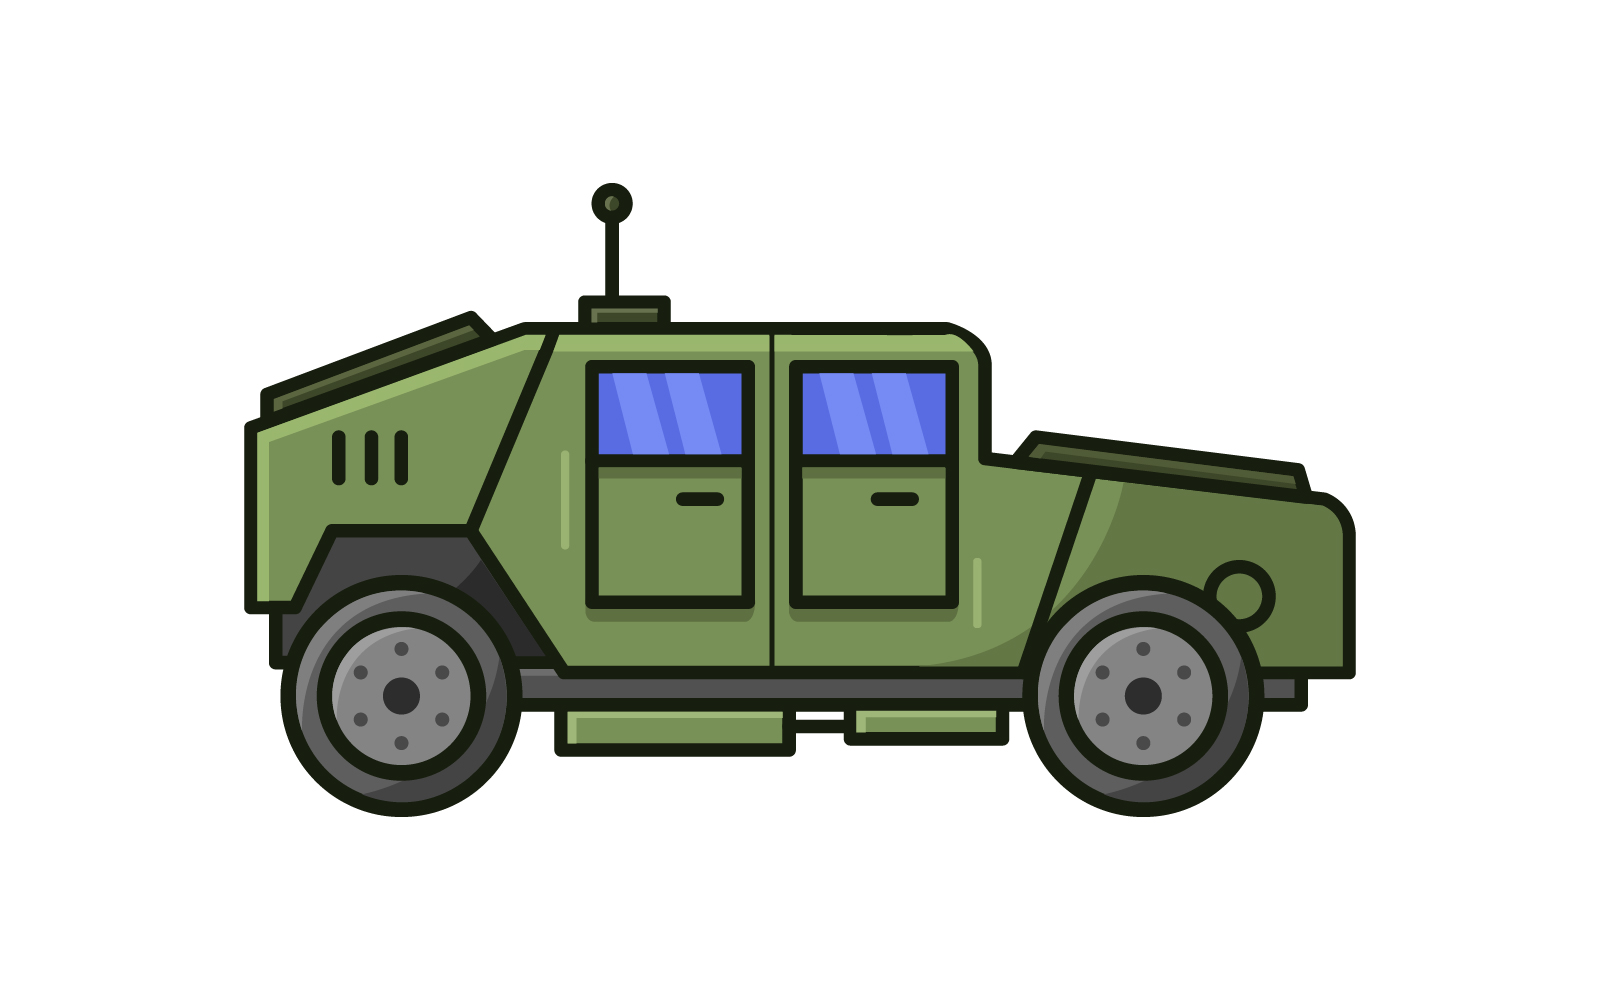 Jeep illustrated in vector on a white background